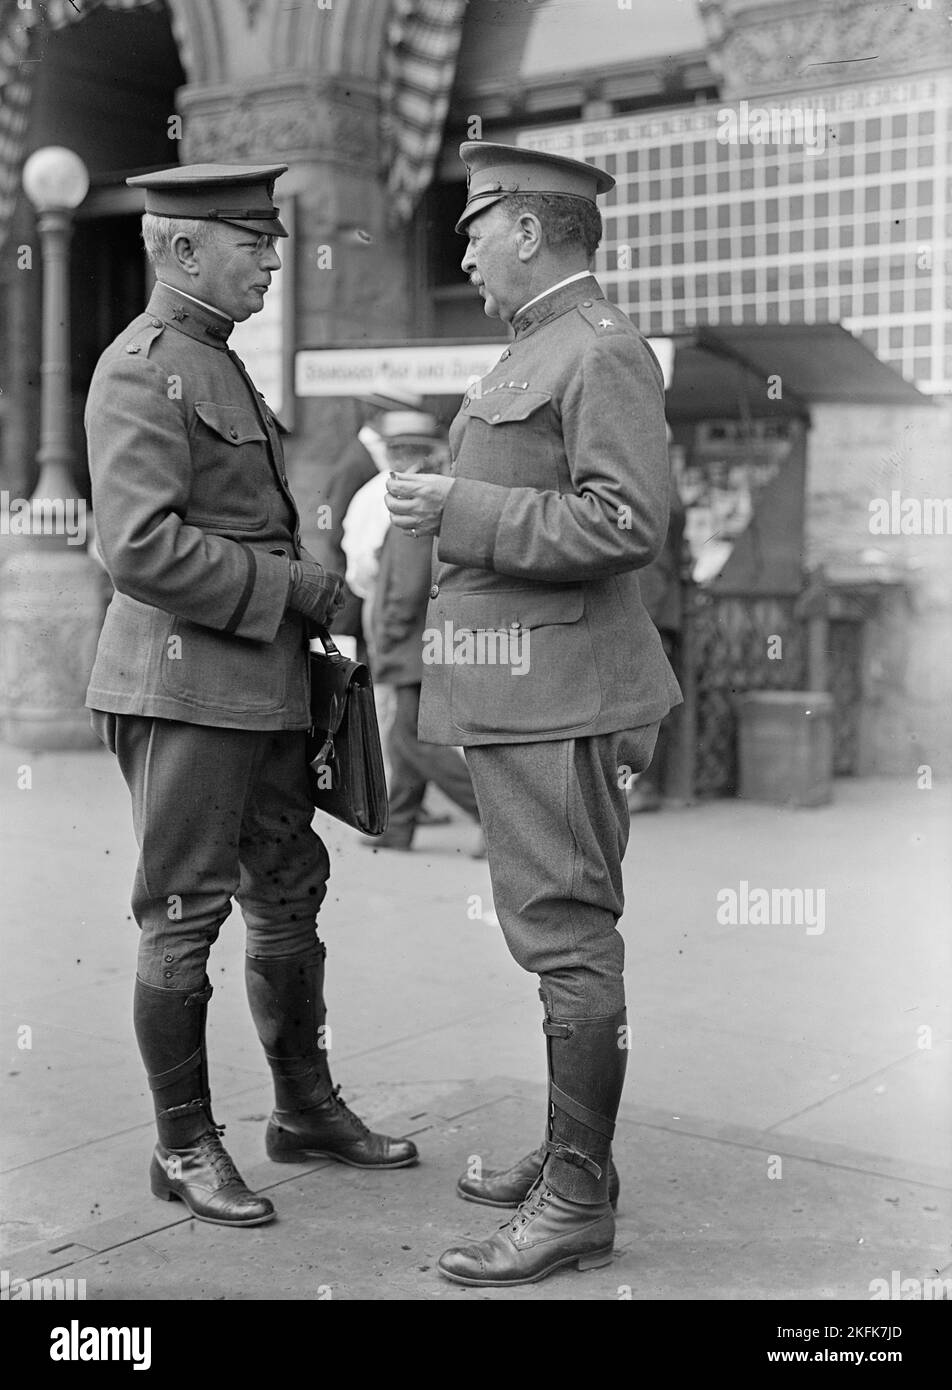 Brigadier General William Murray Black, US Army, Right, with Lieutenant Colonel Pierce, 1917. Black was Commandant of the Army Engineer School, and Chief of Engineers during World War I. Stock Photo